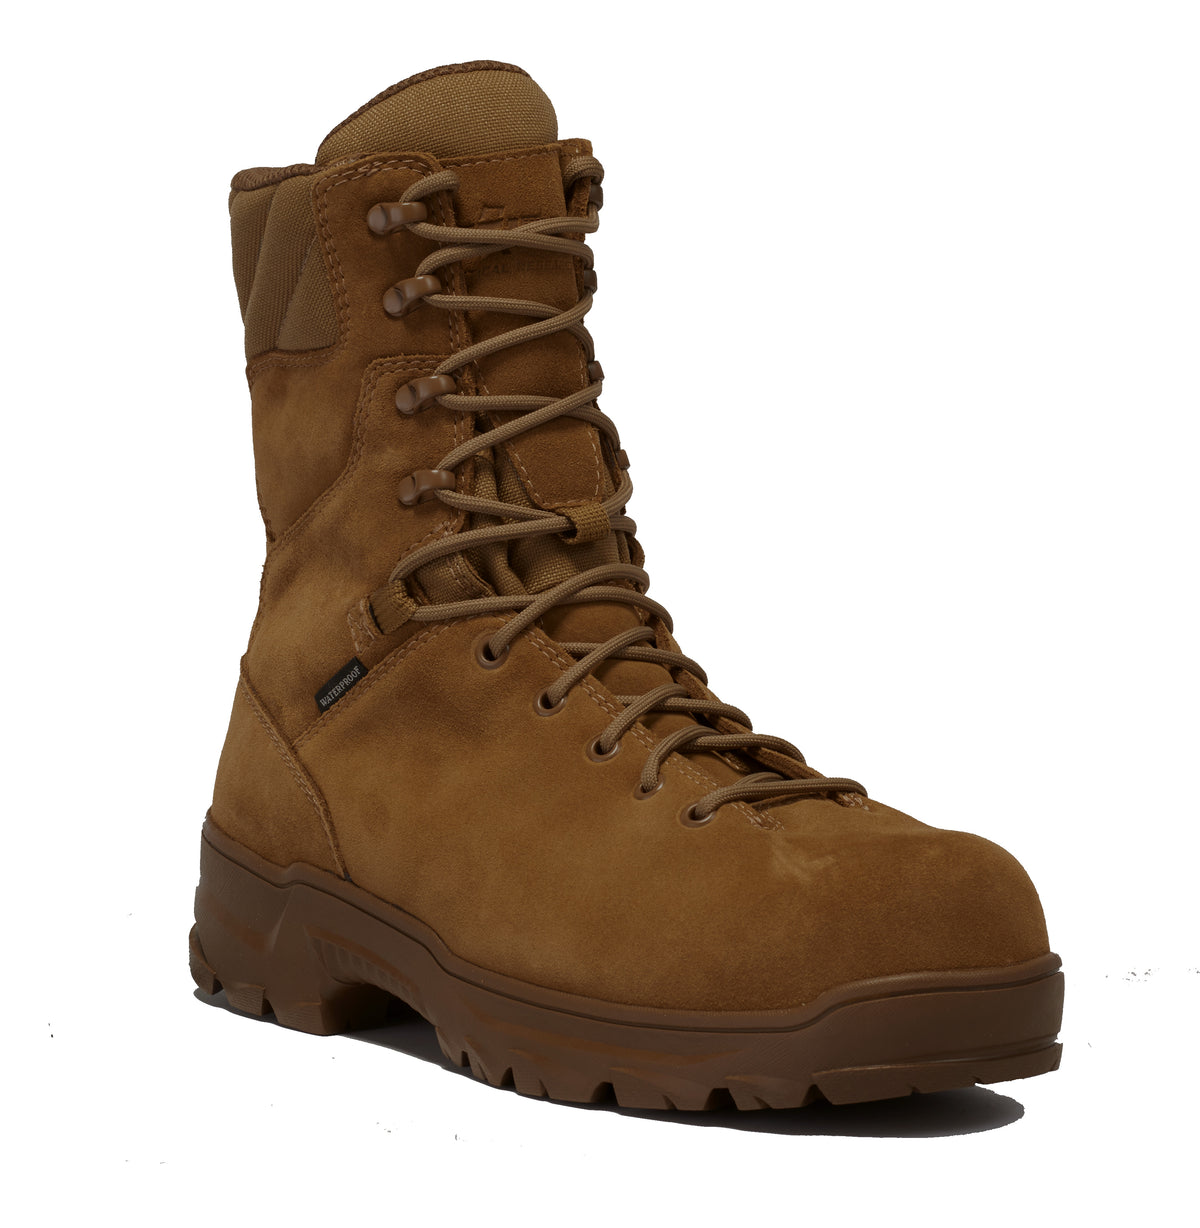 Belleville SQUALL Insulated Composite Toe Military Boots